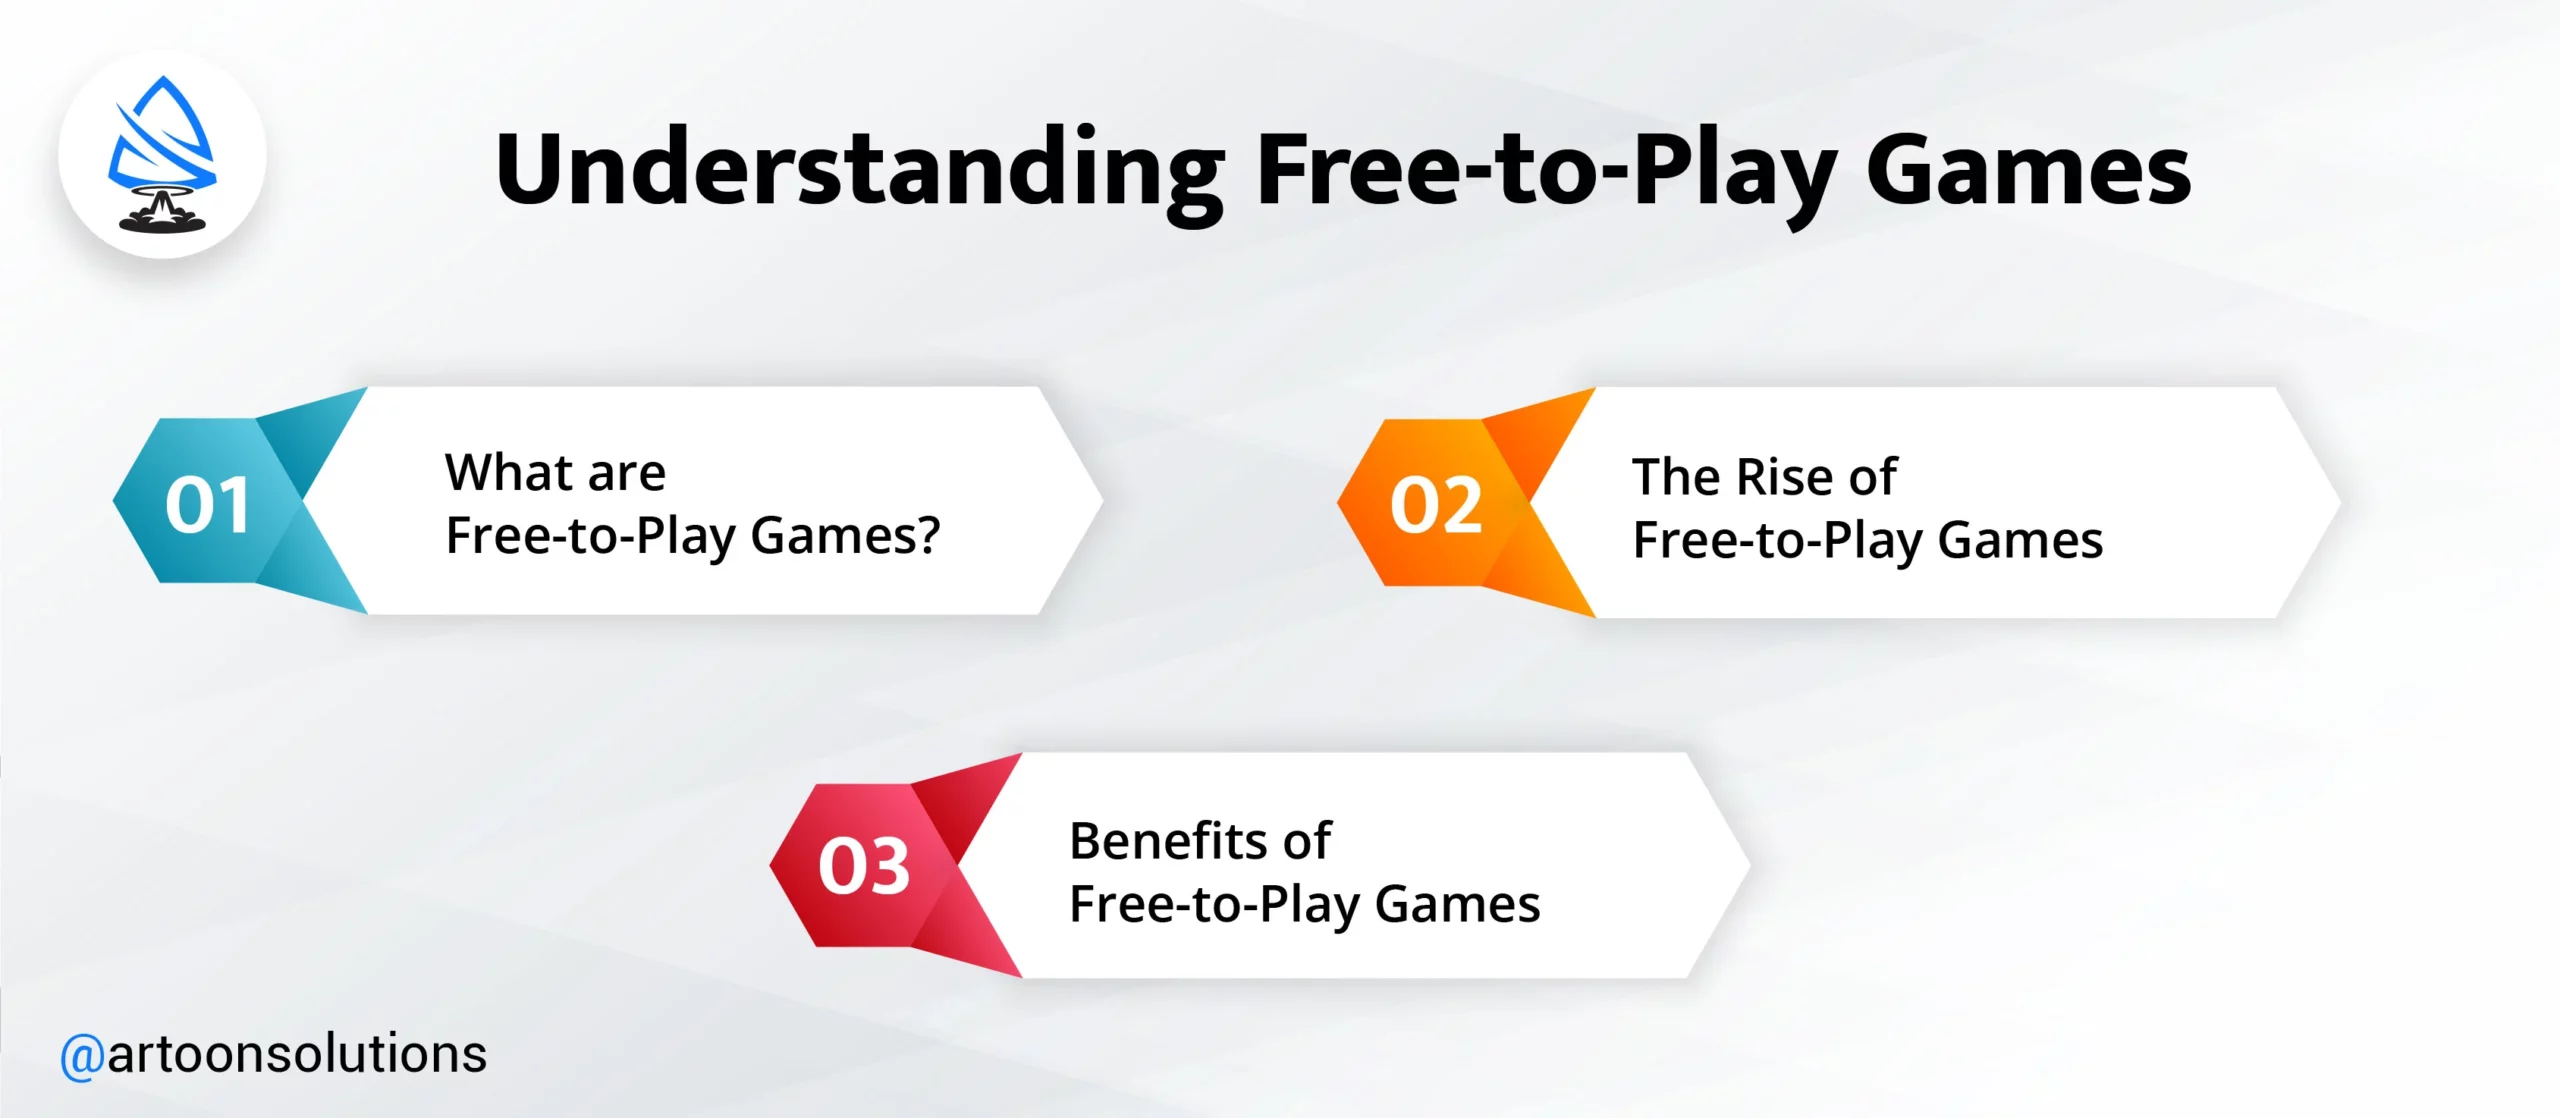 Understanding Free-to-Play Games